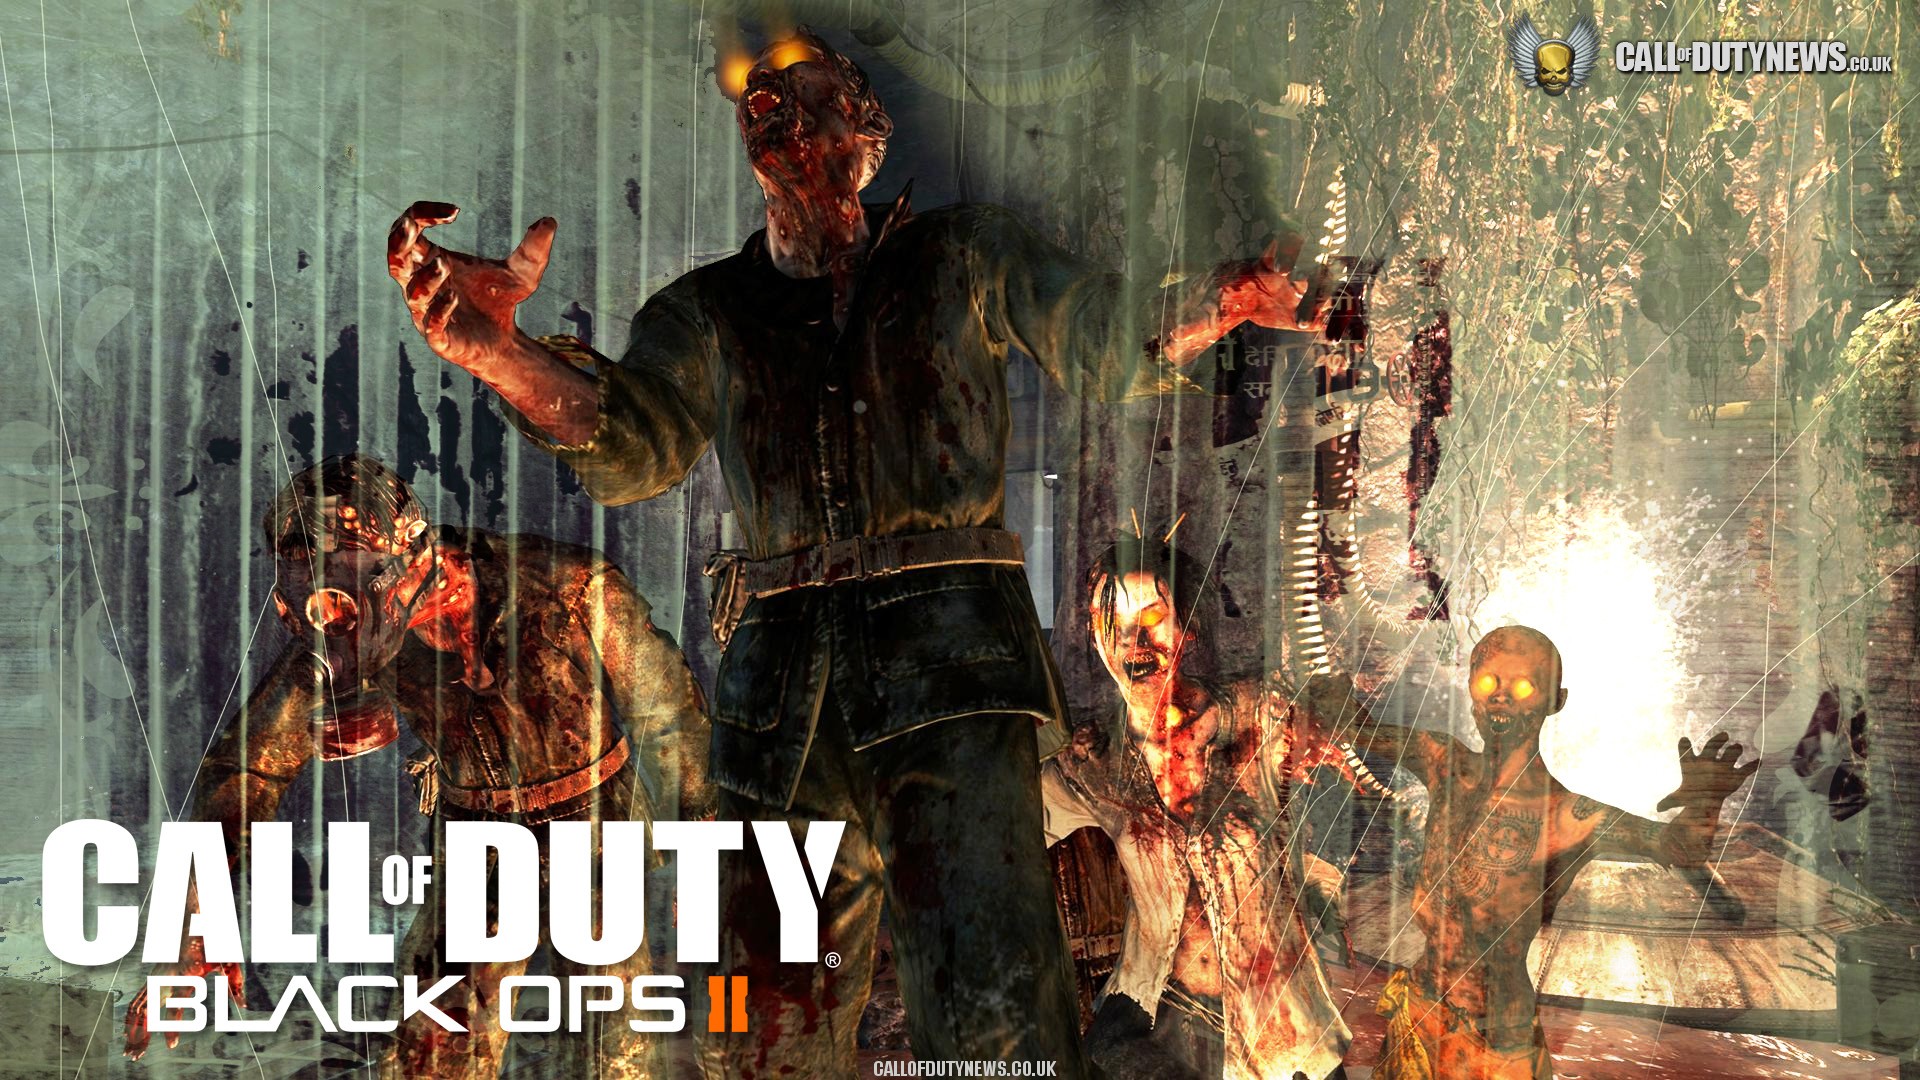 duty black ops 2 zombies wallpaper hdCall Of Duty Black Ops 2 Zombies 1920x1080